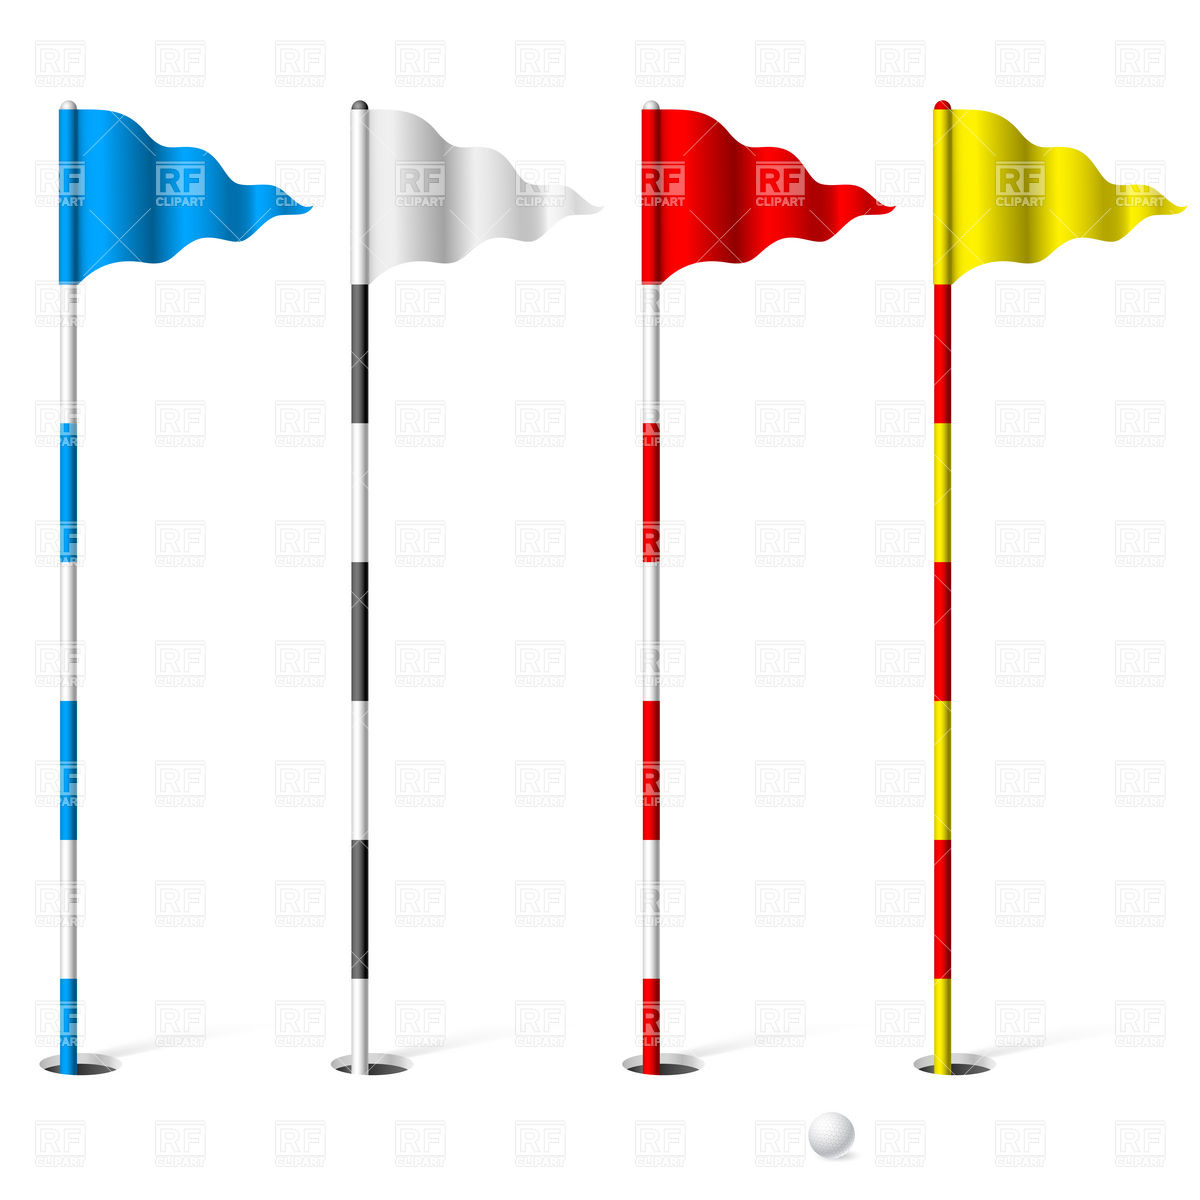 Golf Flag Pictures Clipart Be